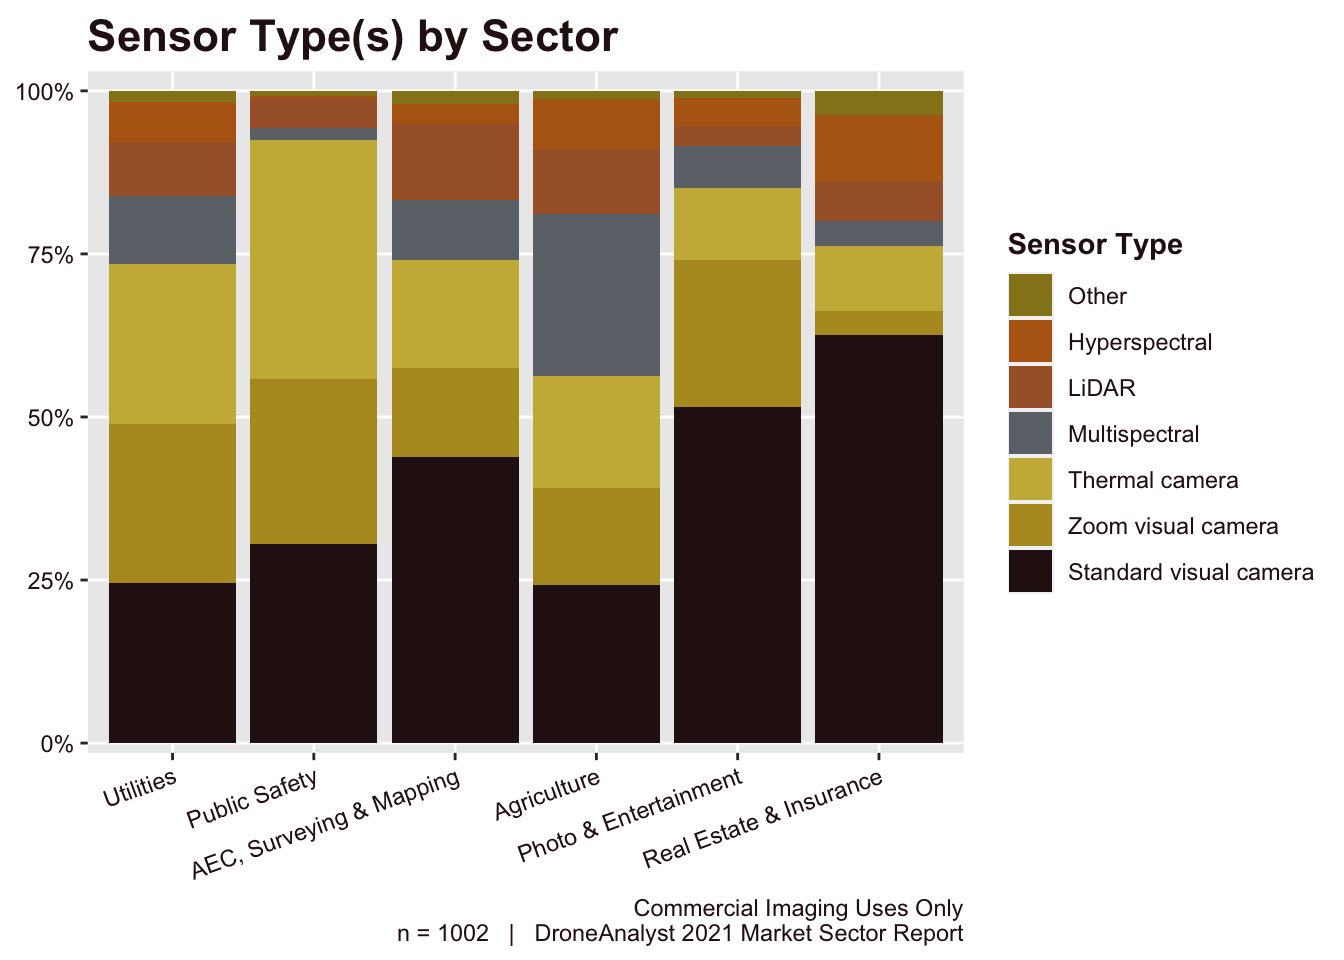 Fig 18: Sensor Type by Sector